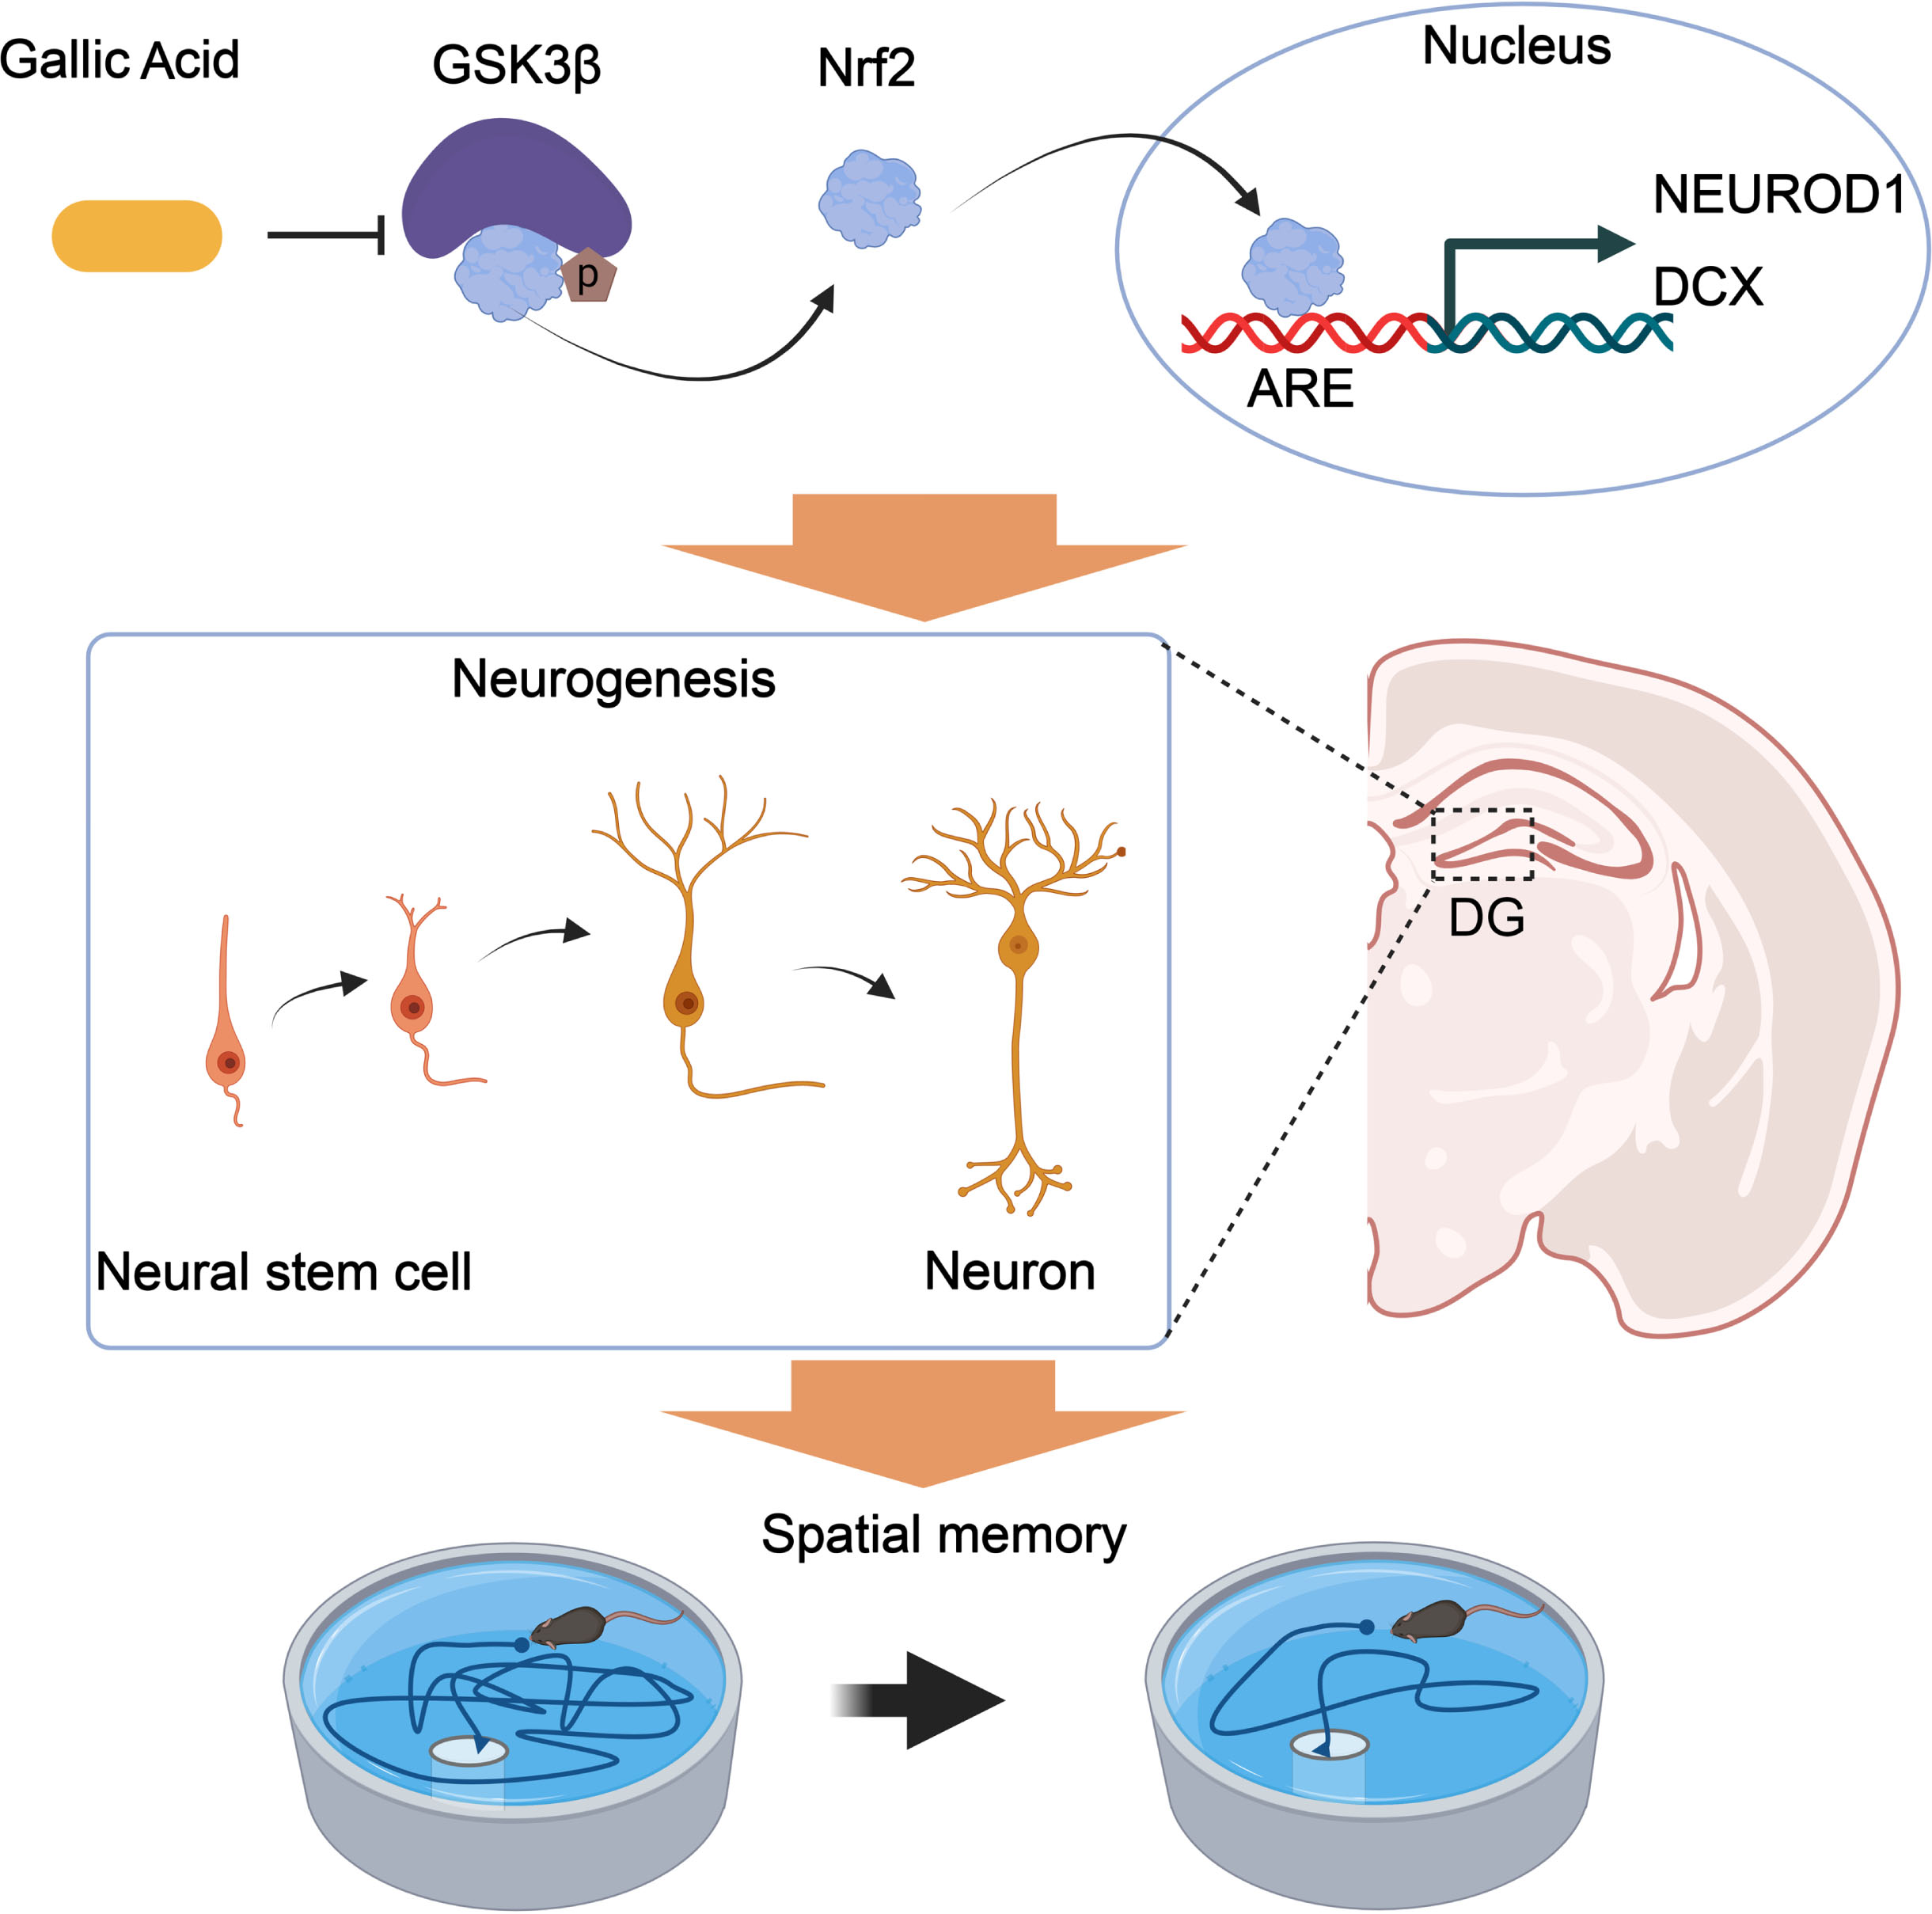 Proposed mechanisms of GA in promoting neurogenesis and alleviating AD symptoms. GA binds to and inhibits GSK-3β activity, reducing the phosphorylation level of Nrf2 and degrading its ubiquitination. Nrf2 transcriptionally regulates the expression of NEUROD1 and DCX genes in the nucleus, promoting an increase in the number of neural synapses in the dentate gyrus of the hippocampus and improving spatial memory in APP/PS1 mice.